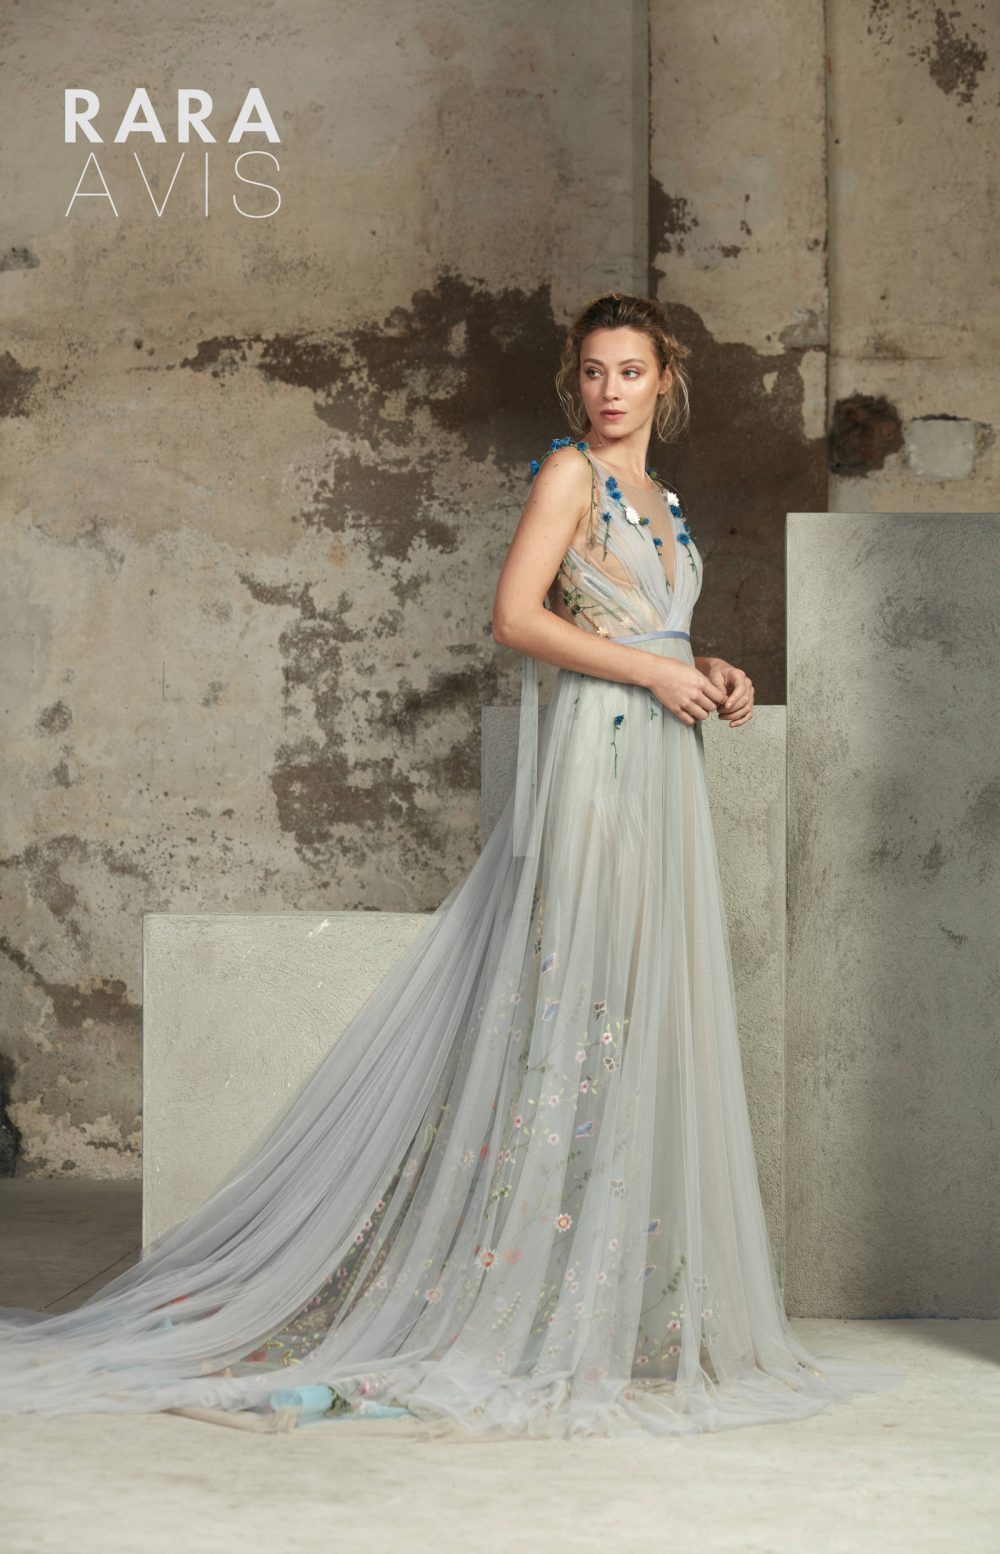 dusty blue wedding dress Lofgrein by Rara Avis with flower straps, wings and crisscross straps on the back, image 6